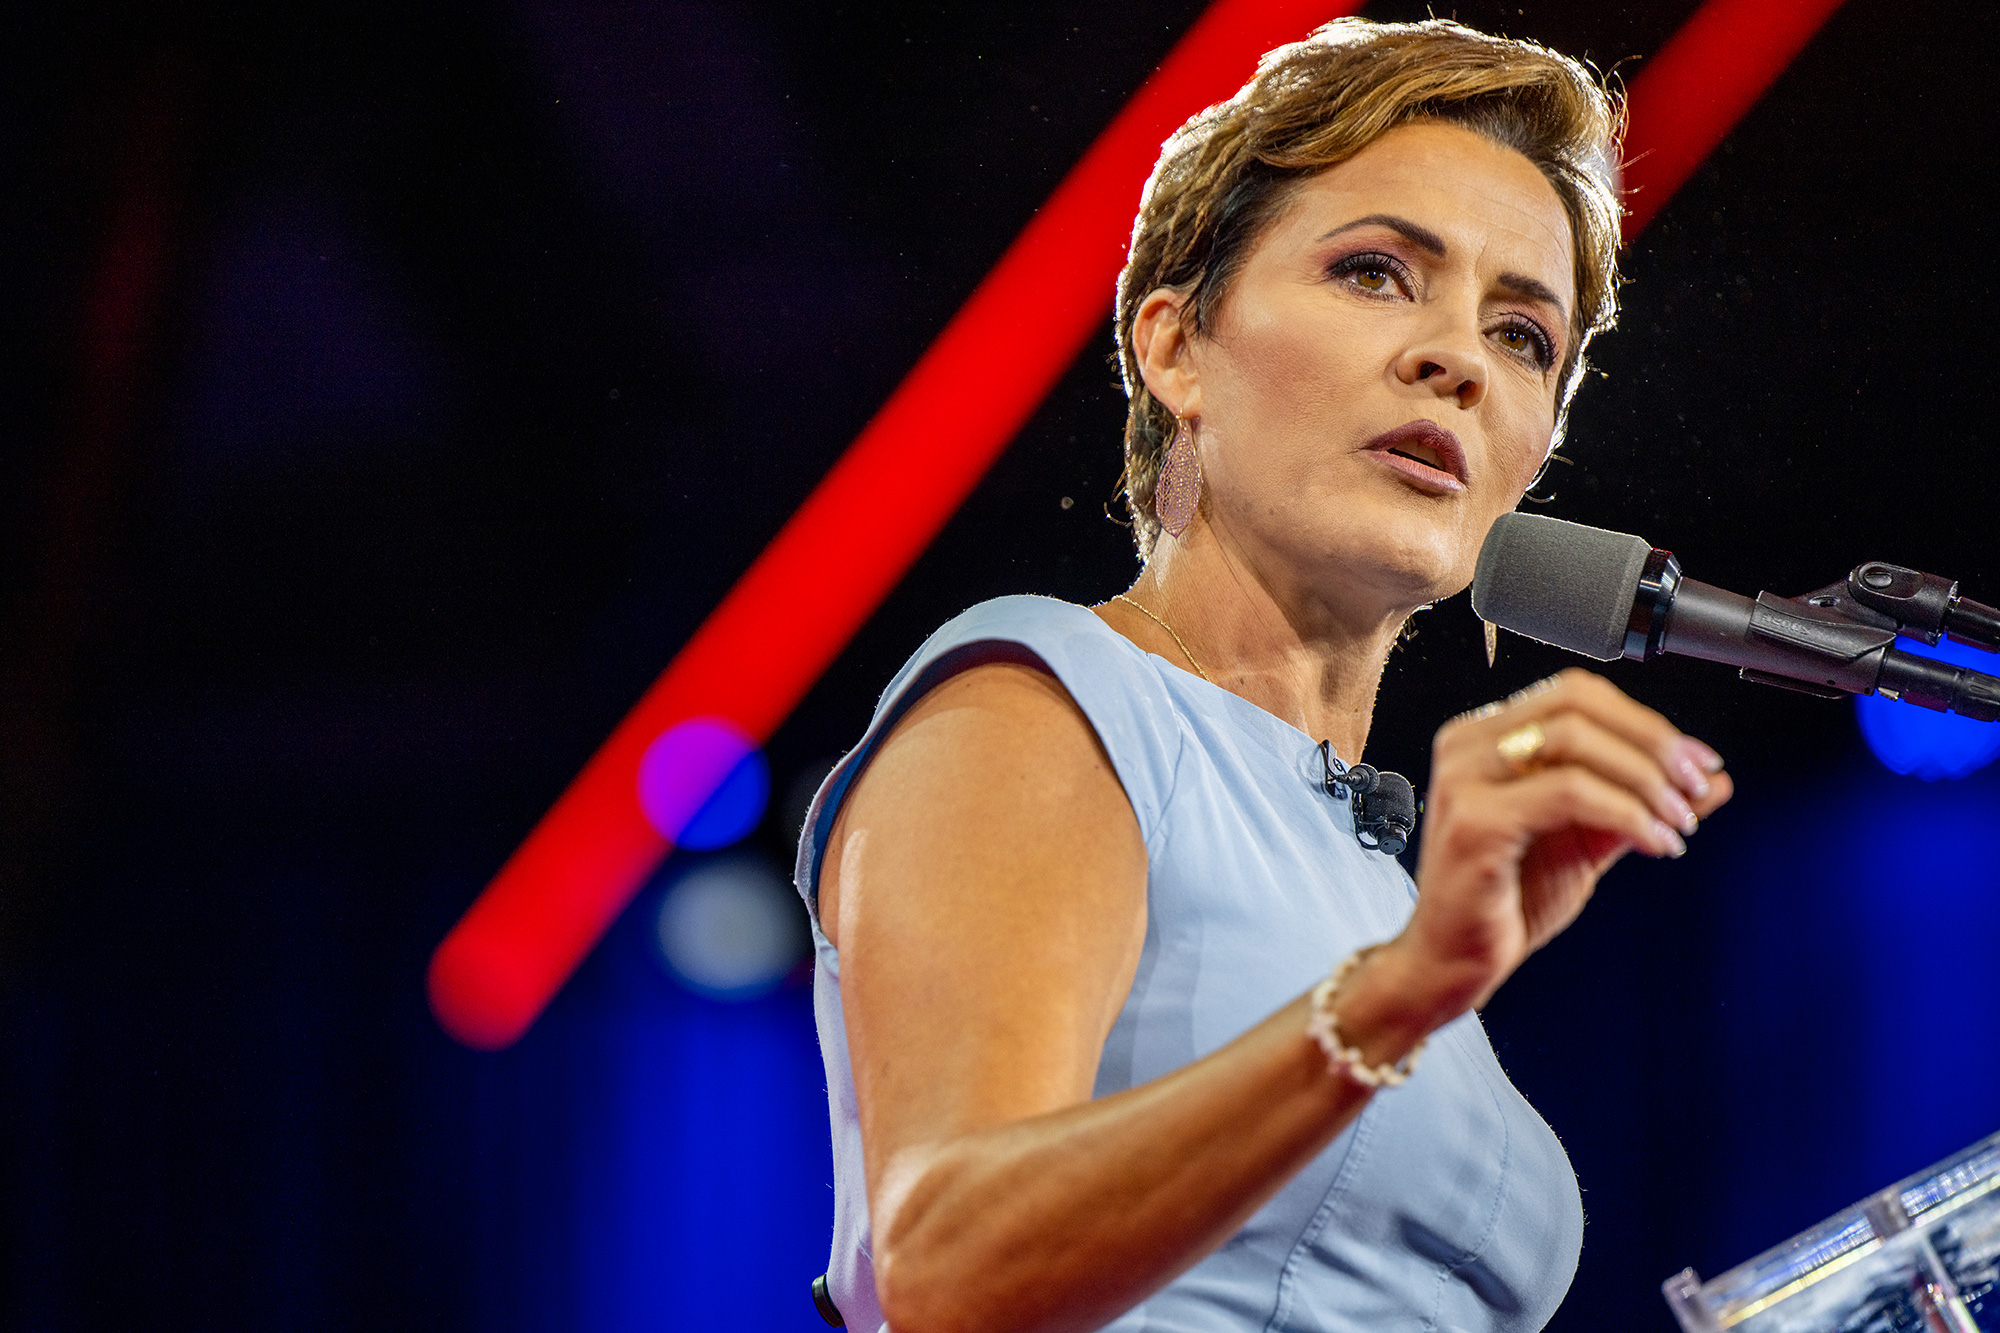 Republican nominee for Arizona governor Kari Lake speaks at the Conservative Political Action Conference in Dallas, Texas, on August 06, 2022.